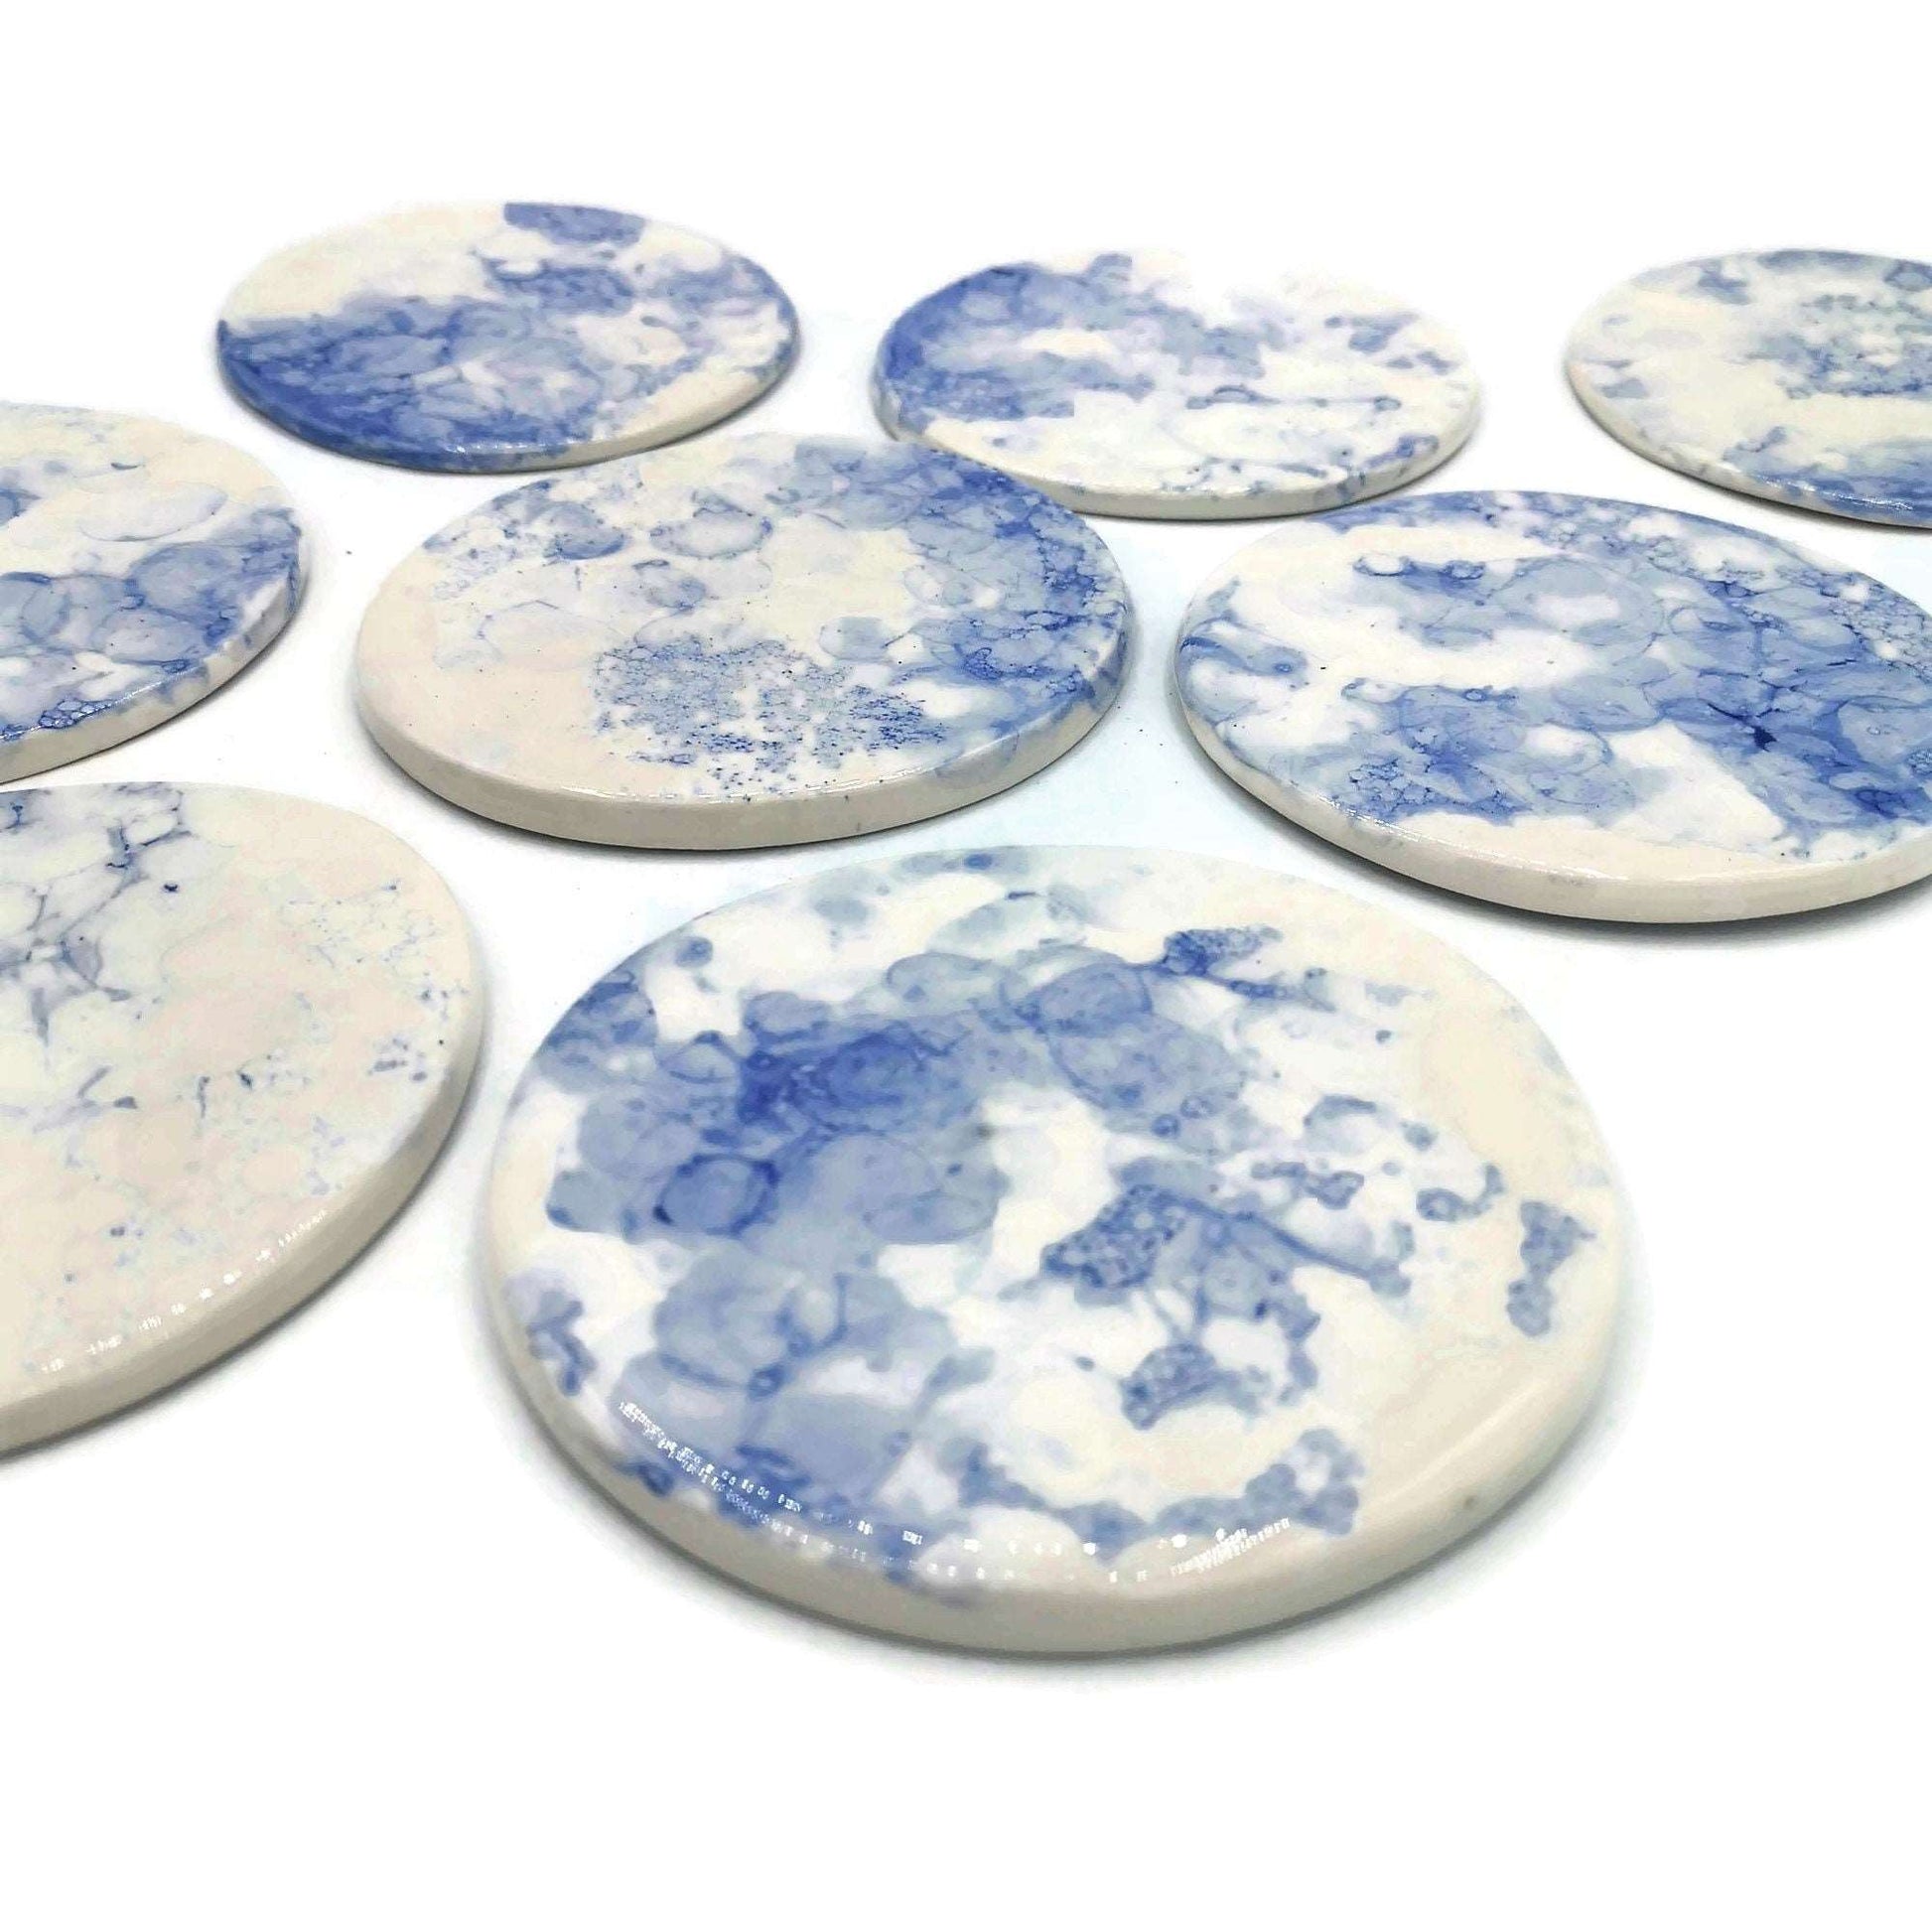 1Pc Handmade Ceramic Coasters, Modern Round Shaped Tile For Office Desk Decor, Mothers Day Gift From Daughter, Housewarming Gift First Home